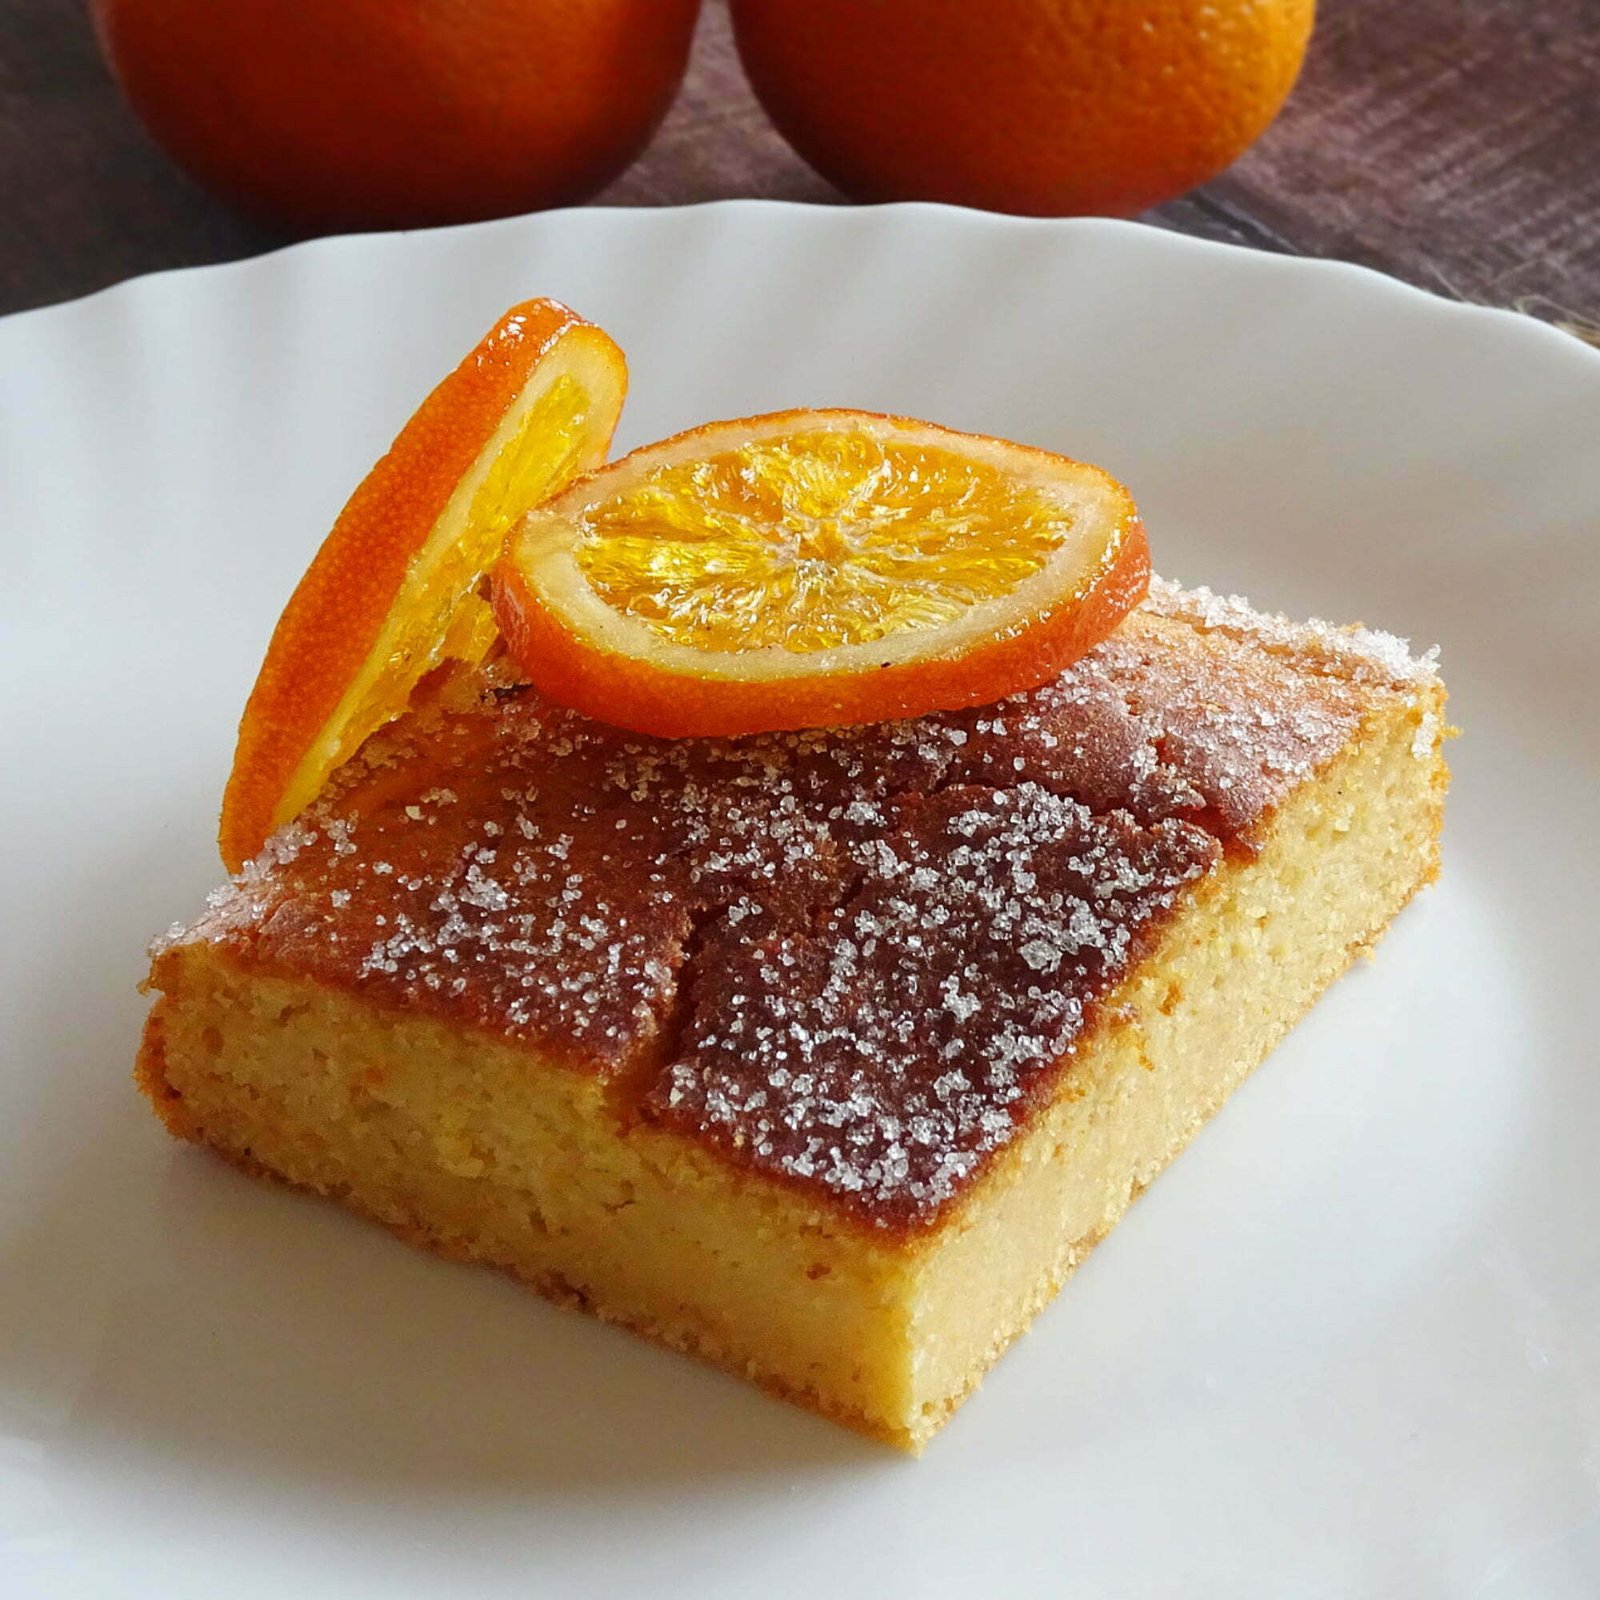 A slice of orange and grapefruit cake sits on a white plate and is garnished with a slice of candied orange